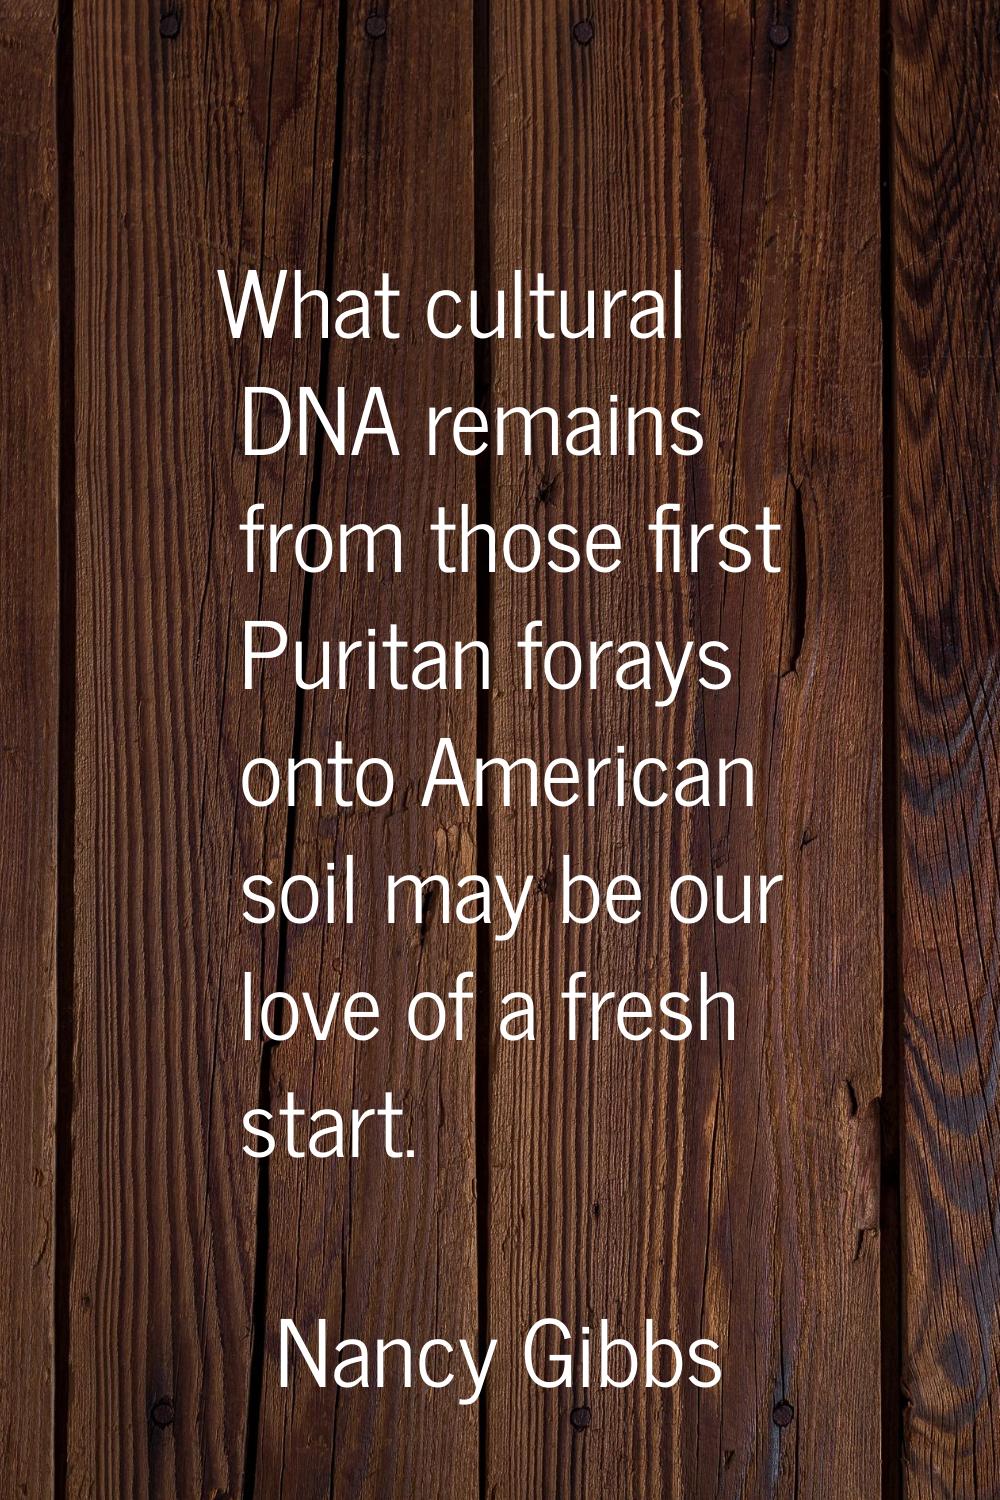 What cultural DNA remains from those first Puritan forays onto American soil may be our love of a f